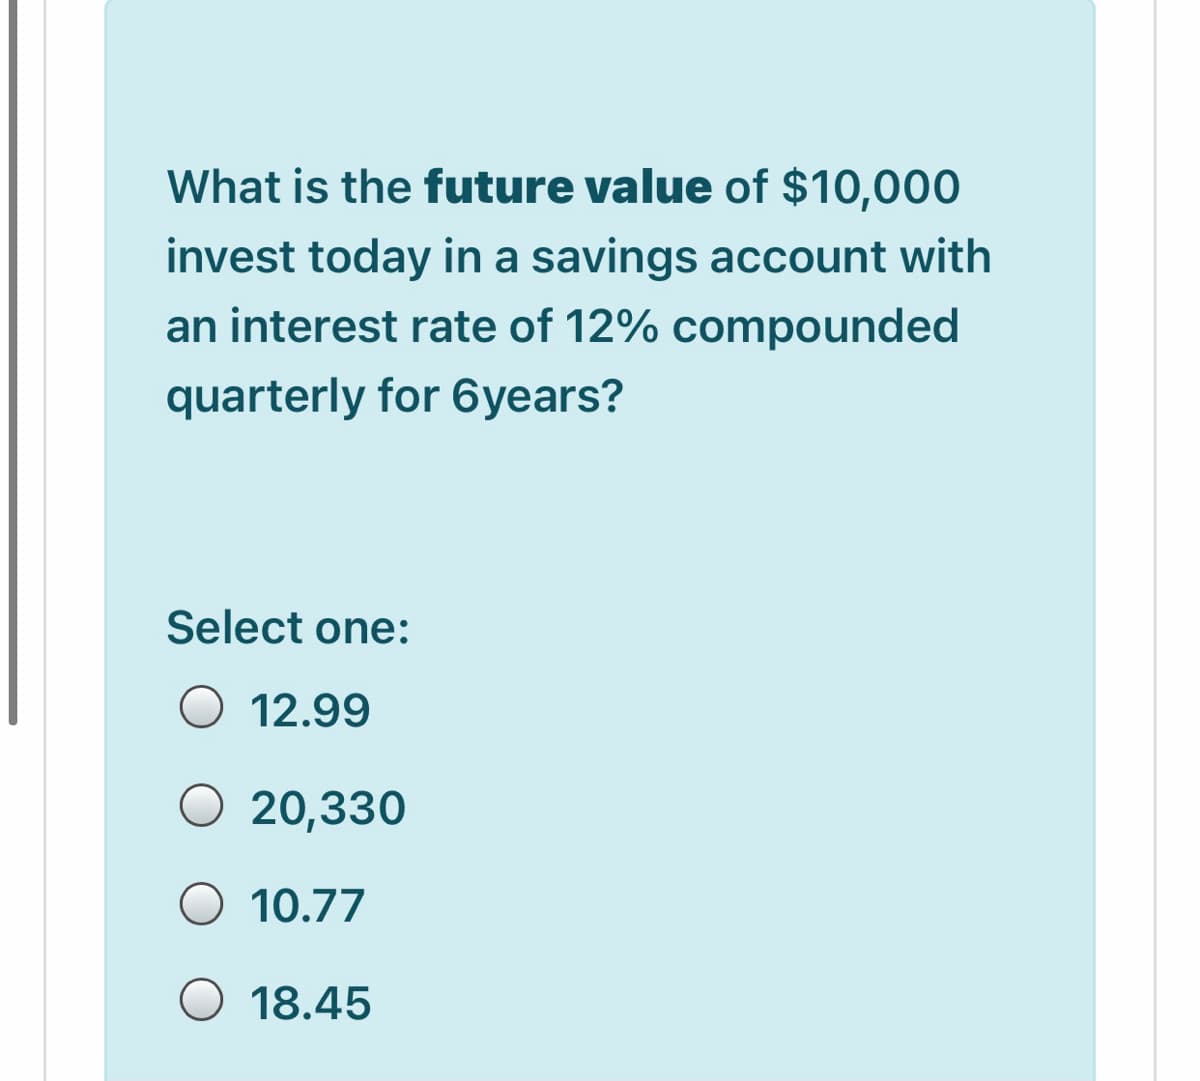 What is the future value of $10,000
invest today in a savings account with
an interest rate of 12% compounded
quarterly for 6years?
Select one:
O 12.99
20,330
O 10.77
O 18.45
